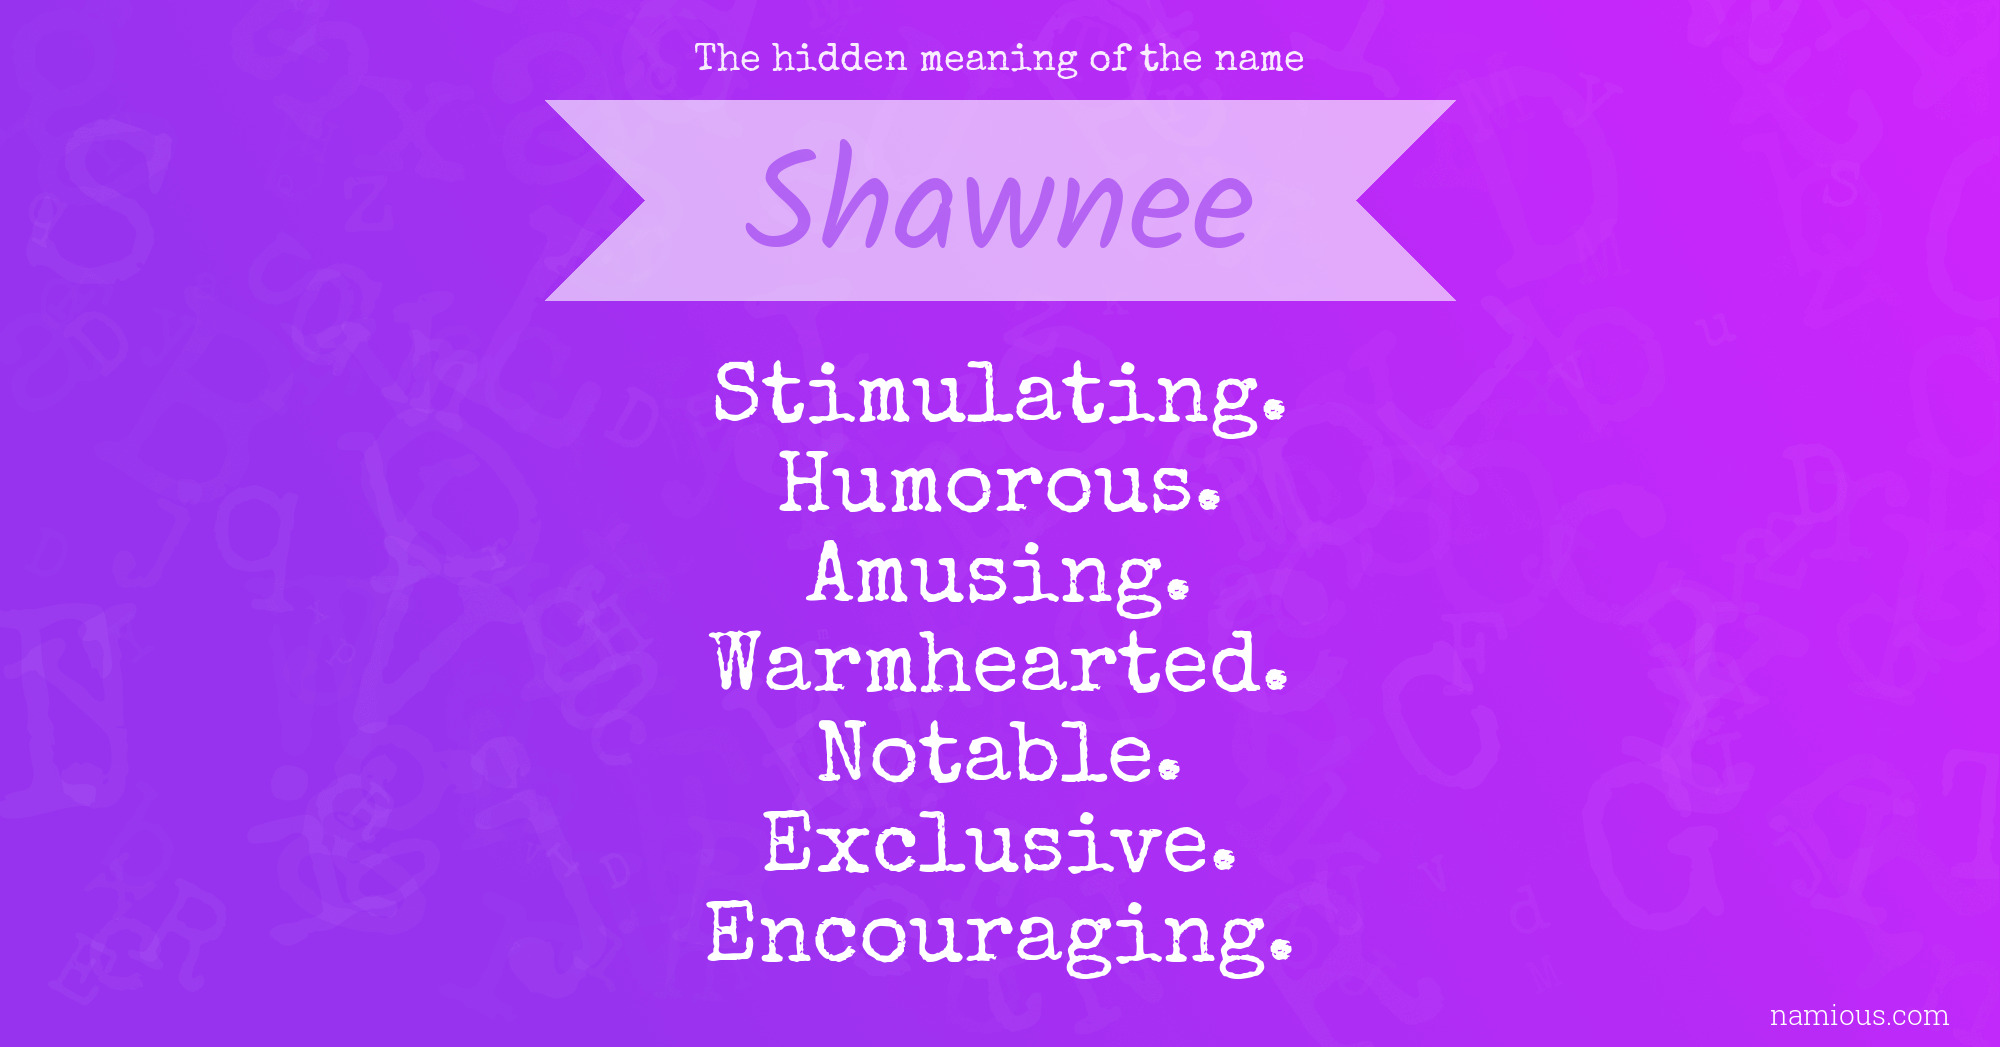 The hidden meaning of the name Shawnee